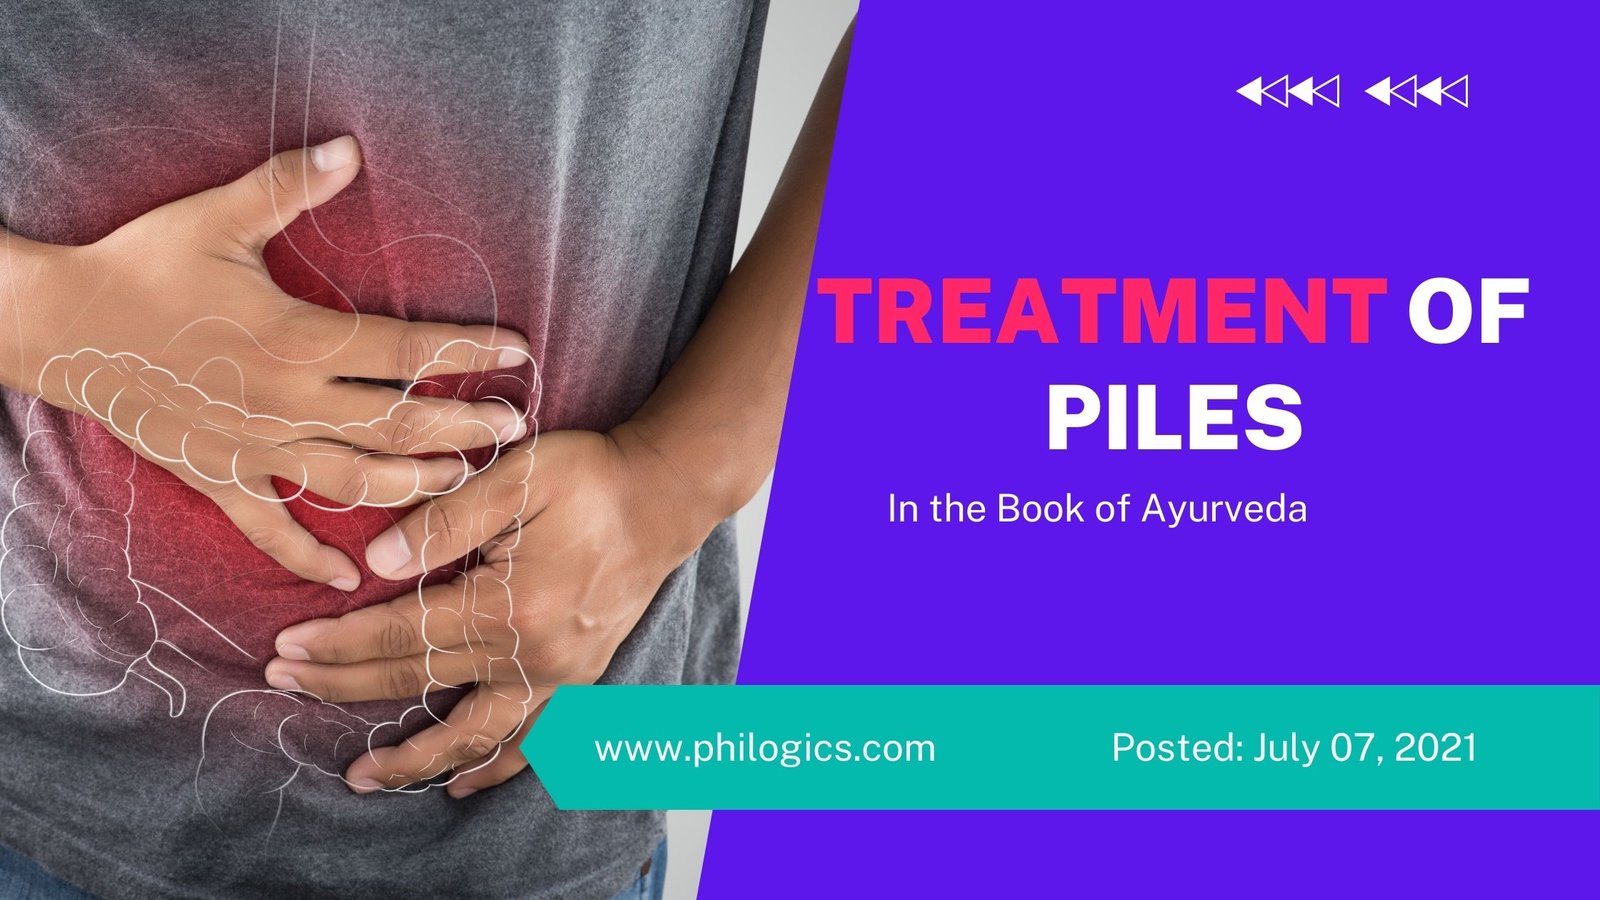 Treatment of Piles in the Book of Ayurveda